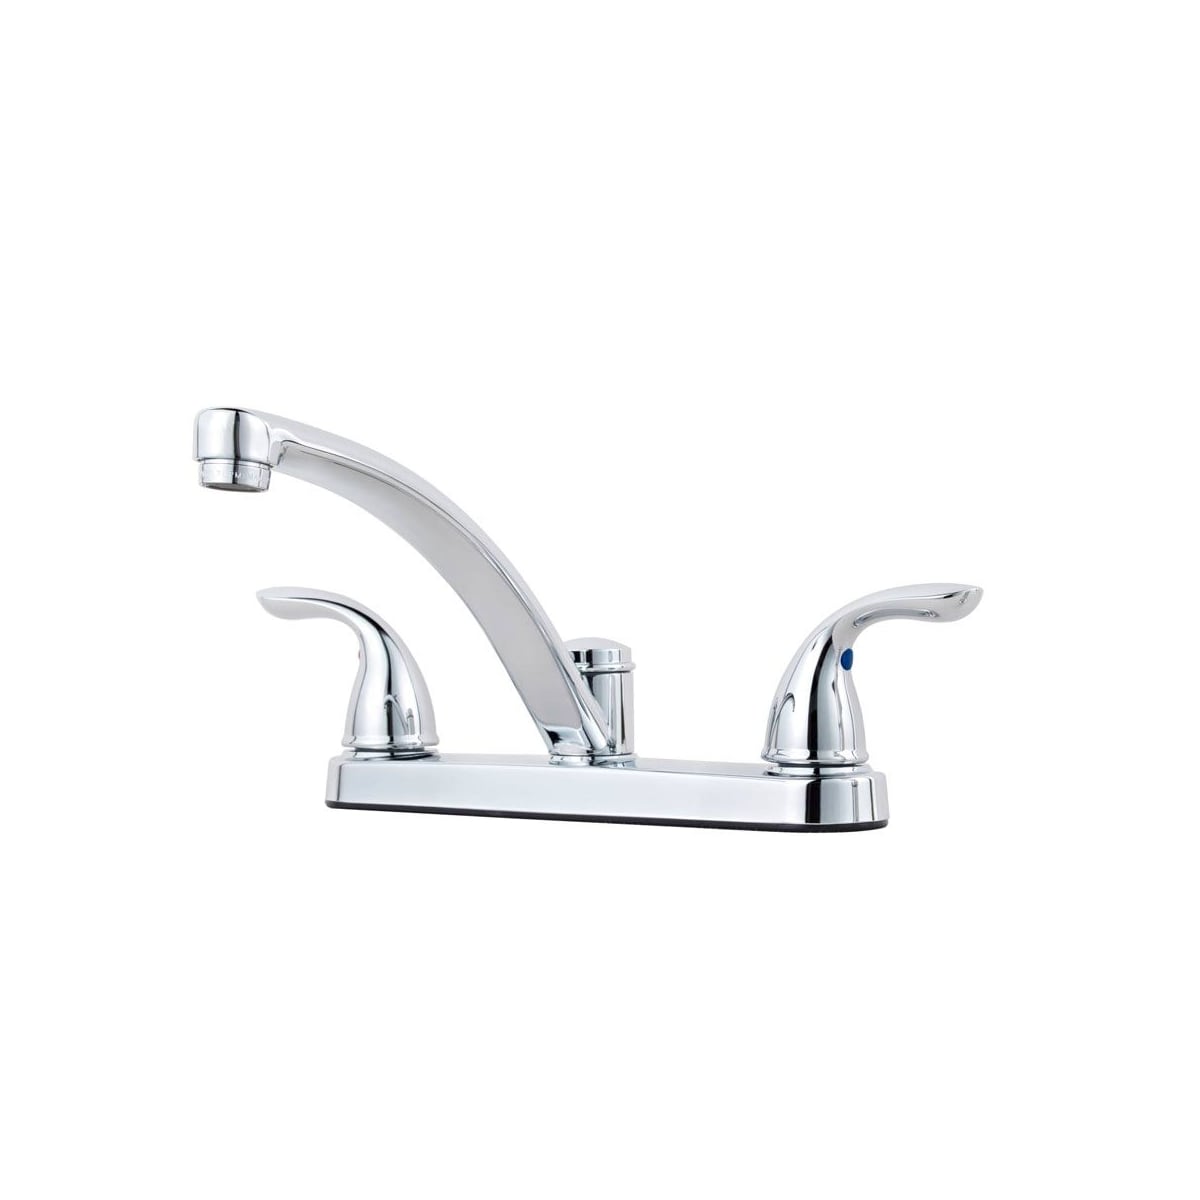 Pfister G135 7000 Polished Chrome Pfirst Series Kitchen Faucet